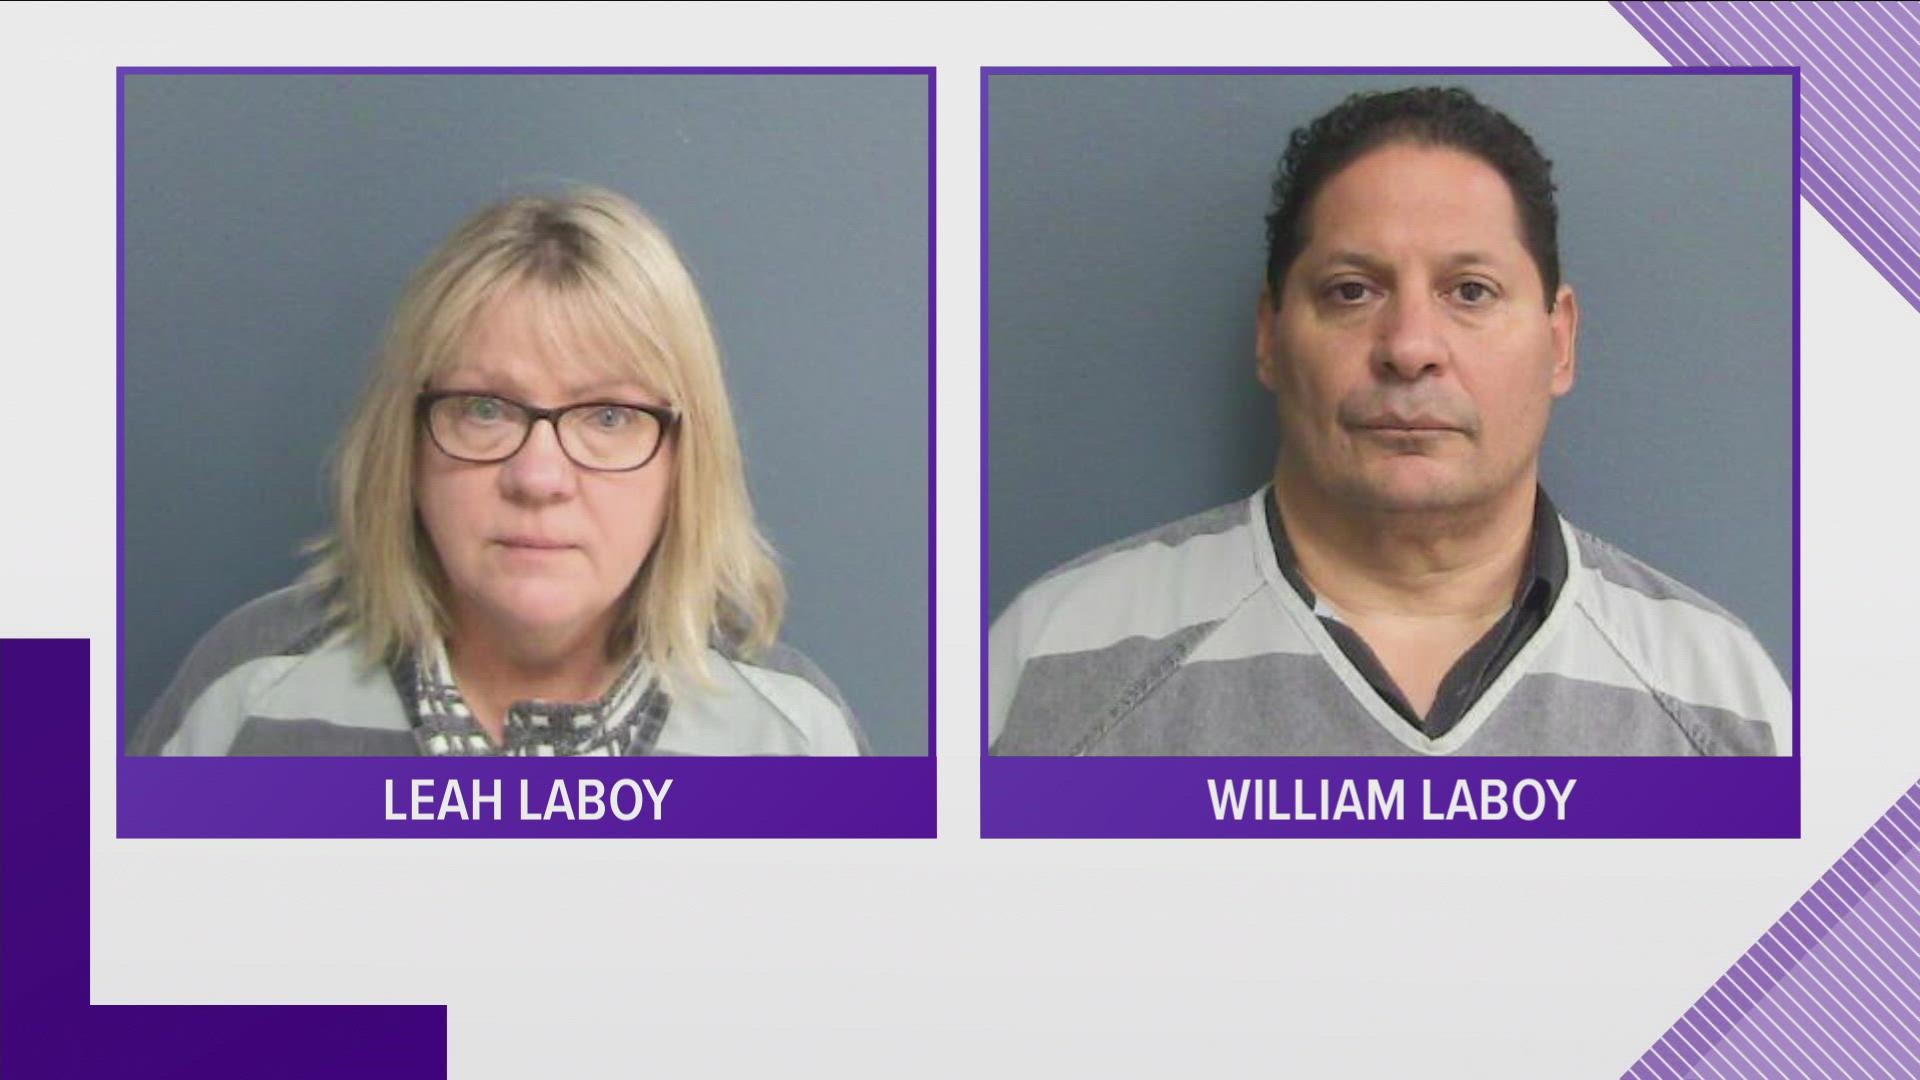 Records identify them as William and Leah Laboy.